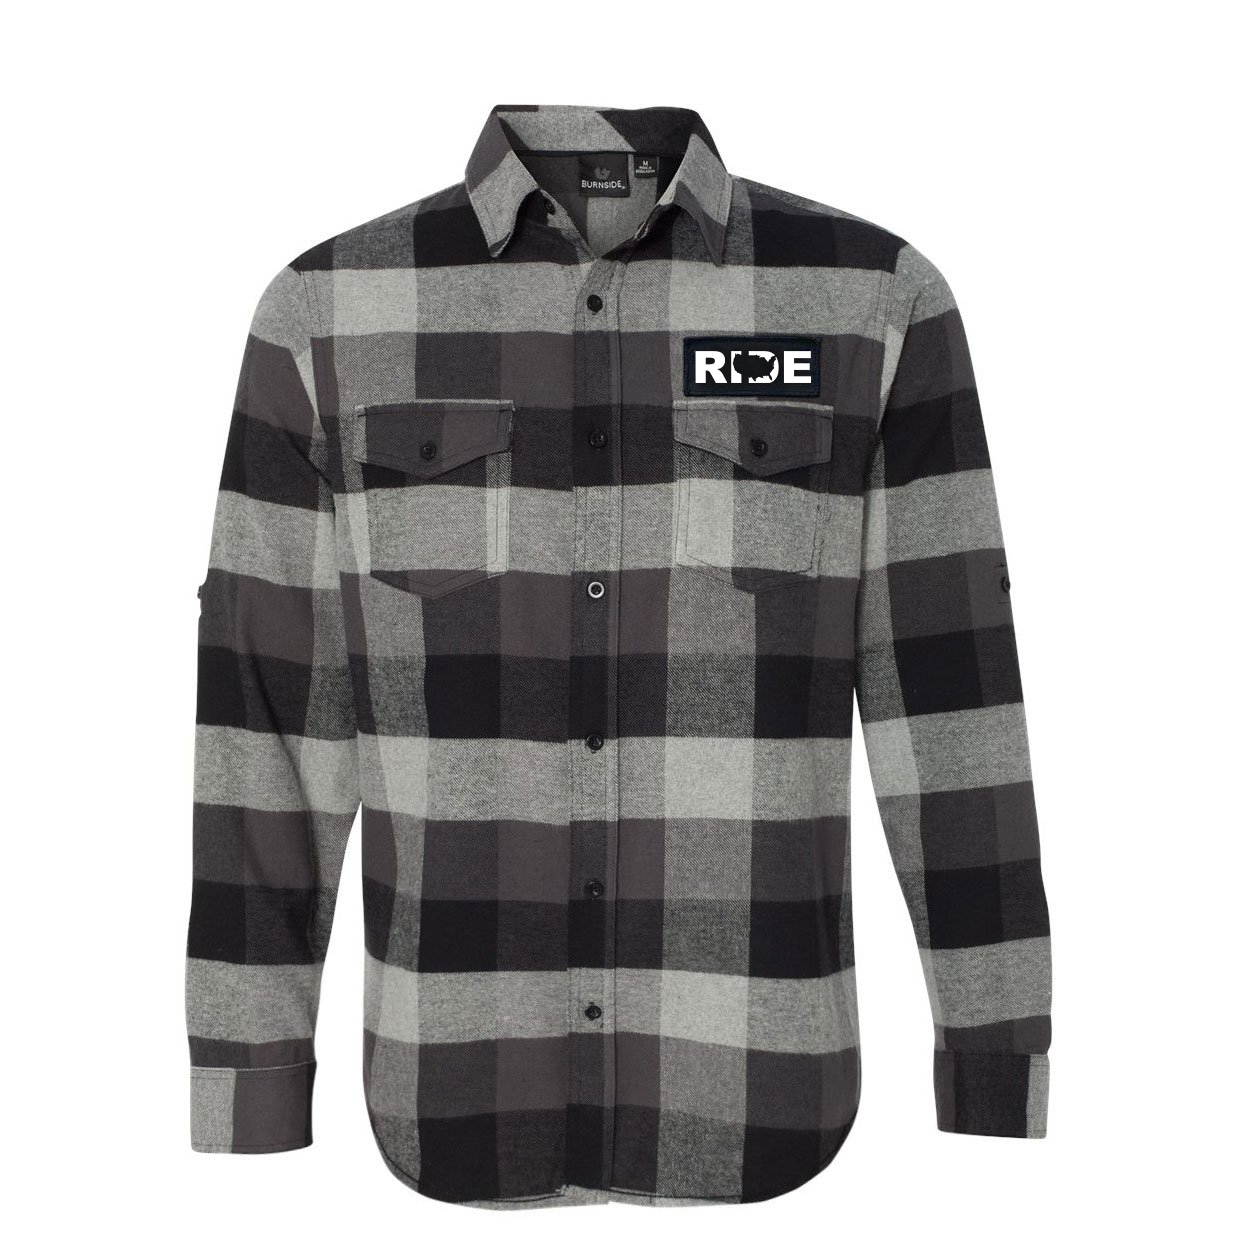 Ride United States Classic Unisex Long Sleeve Woven Patch Flannel Shirt Black/Gray (White Logo)